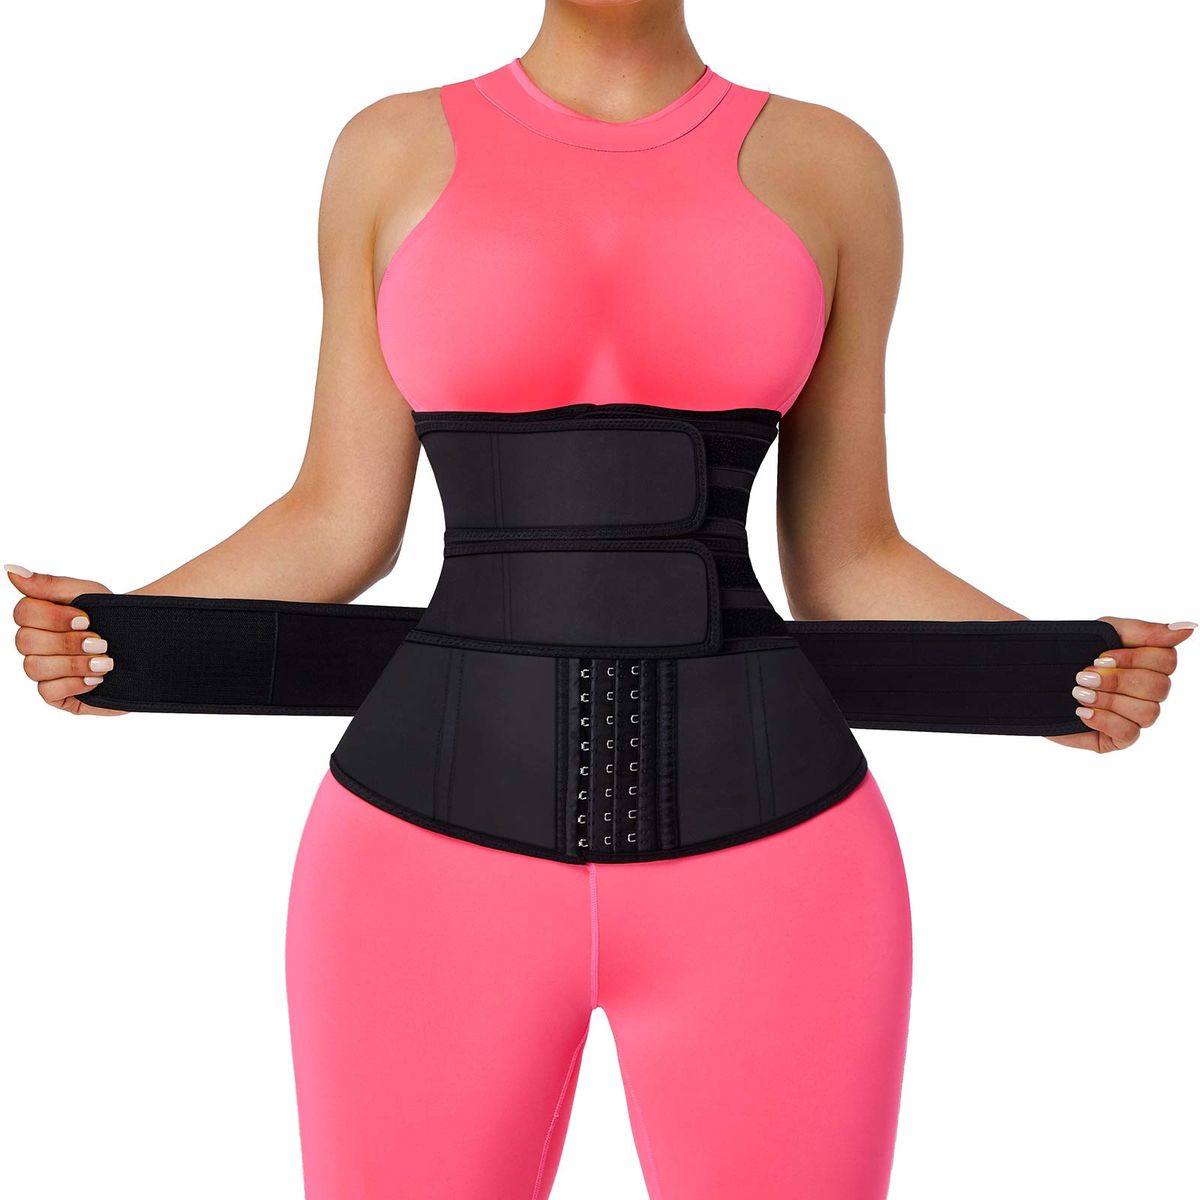 hezkart.com Qatar - 💖Women Waist Trainer Slim Corset Trimmer Belt for 79  QAR ✓Order Now  🚛 FREE SHIPPING 🚛 🔹Colors-  Black and Pink 🔹Available size: S, M, L, XL, and 3XL